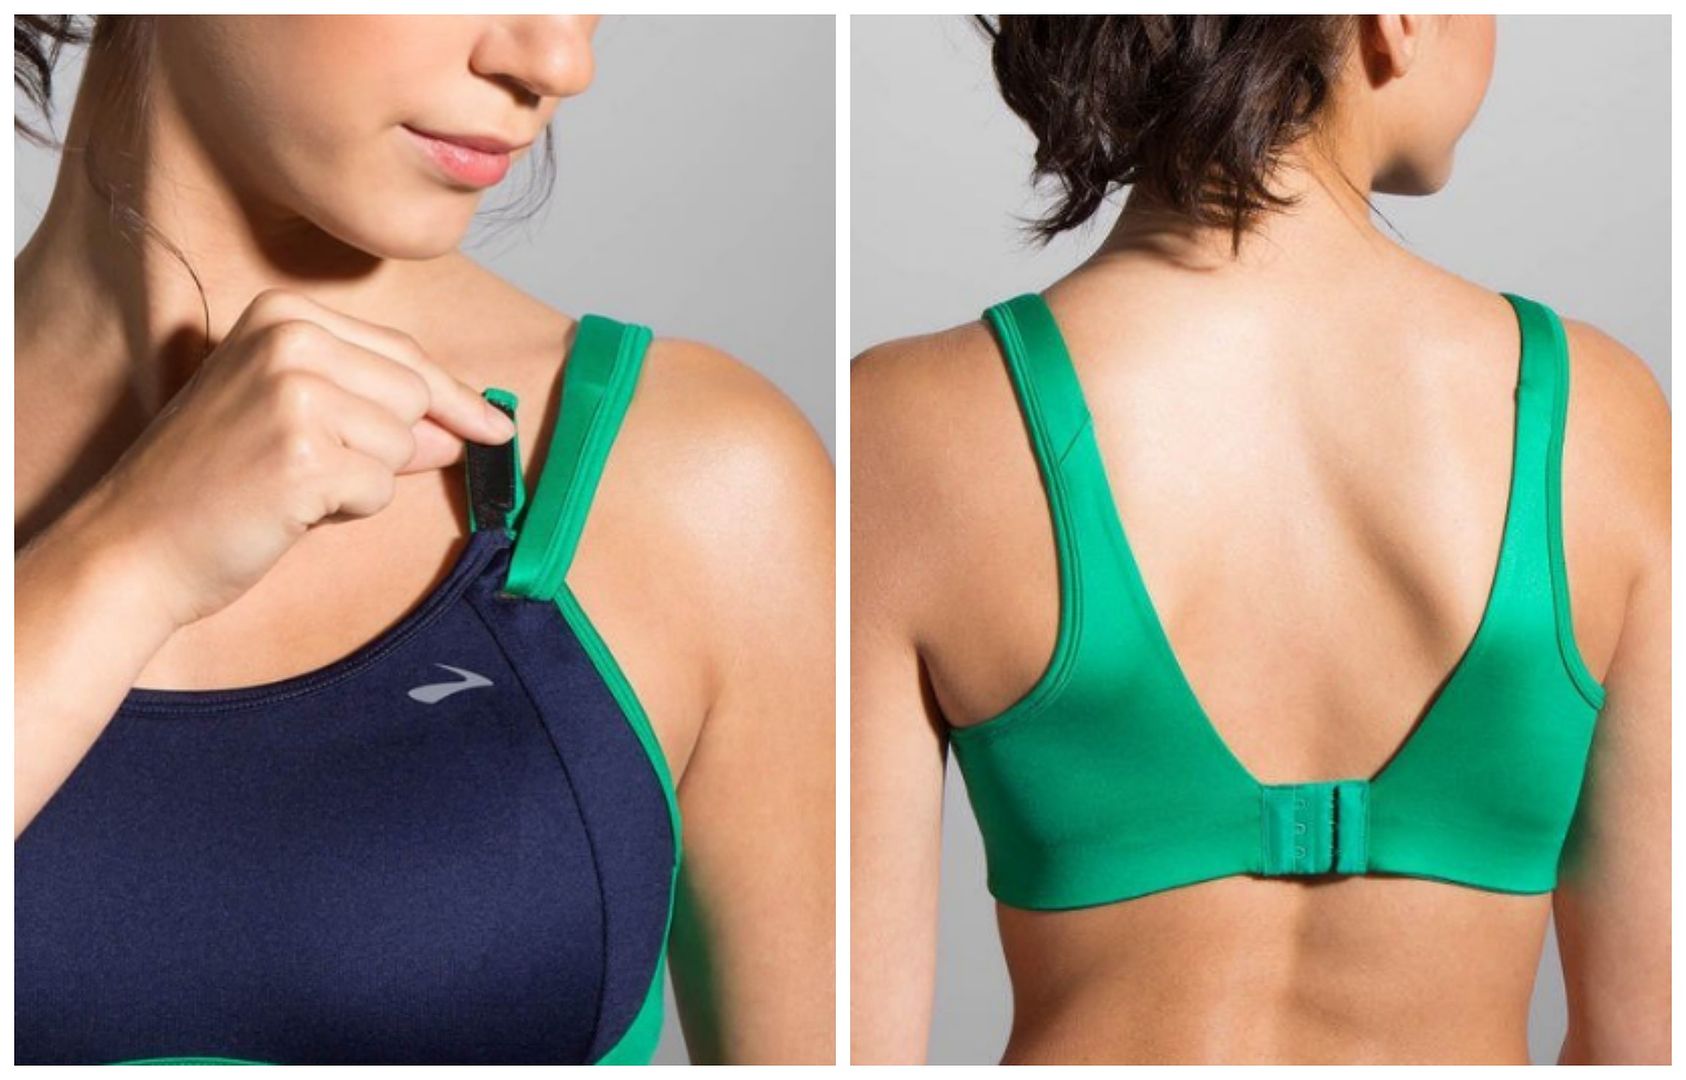 How to choose the right sports bra: The Brooks Fiona running bra